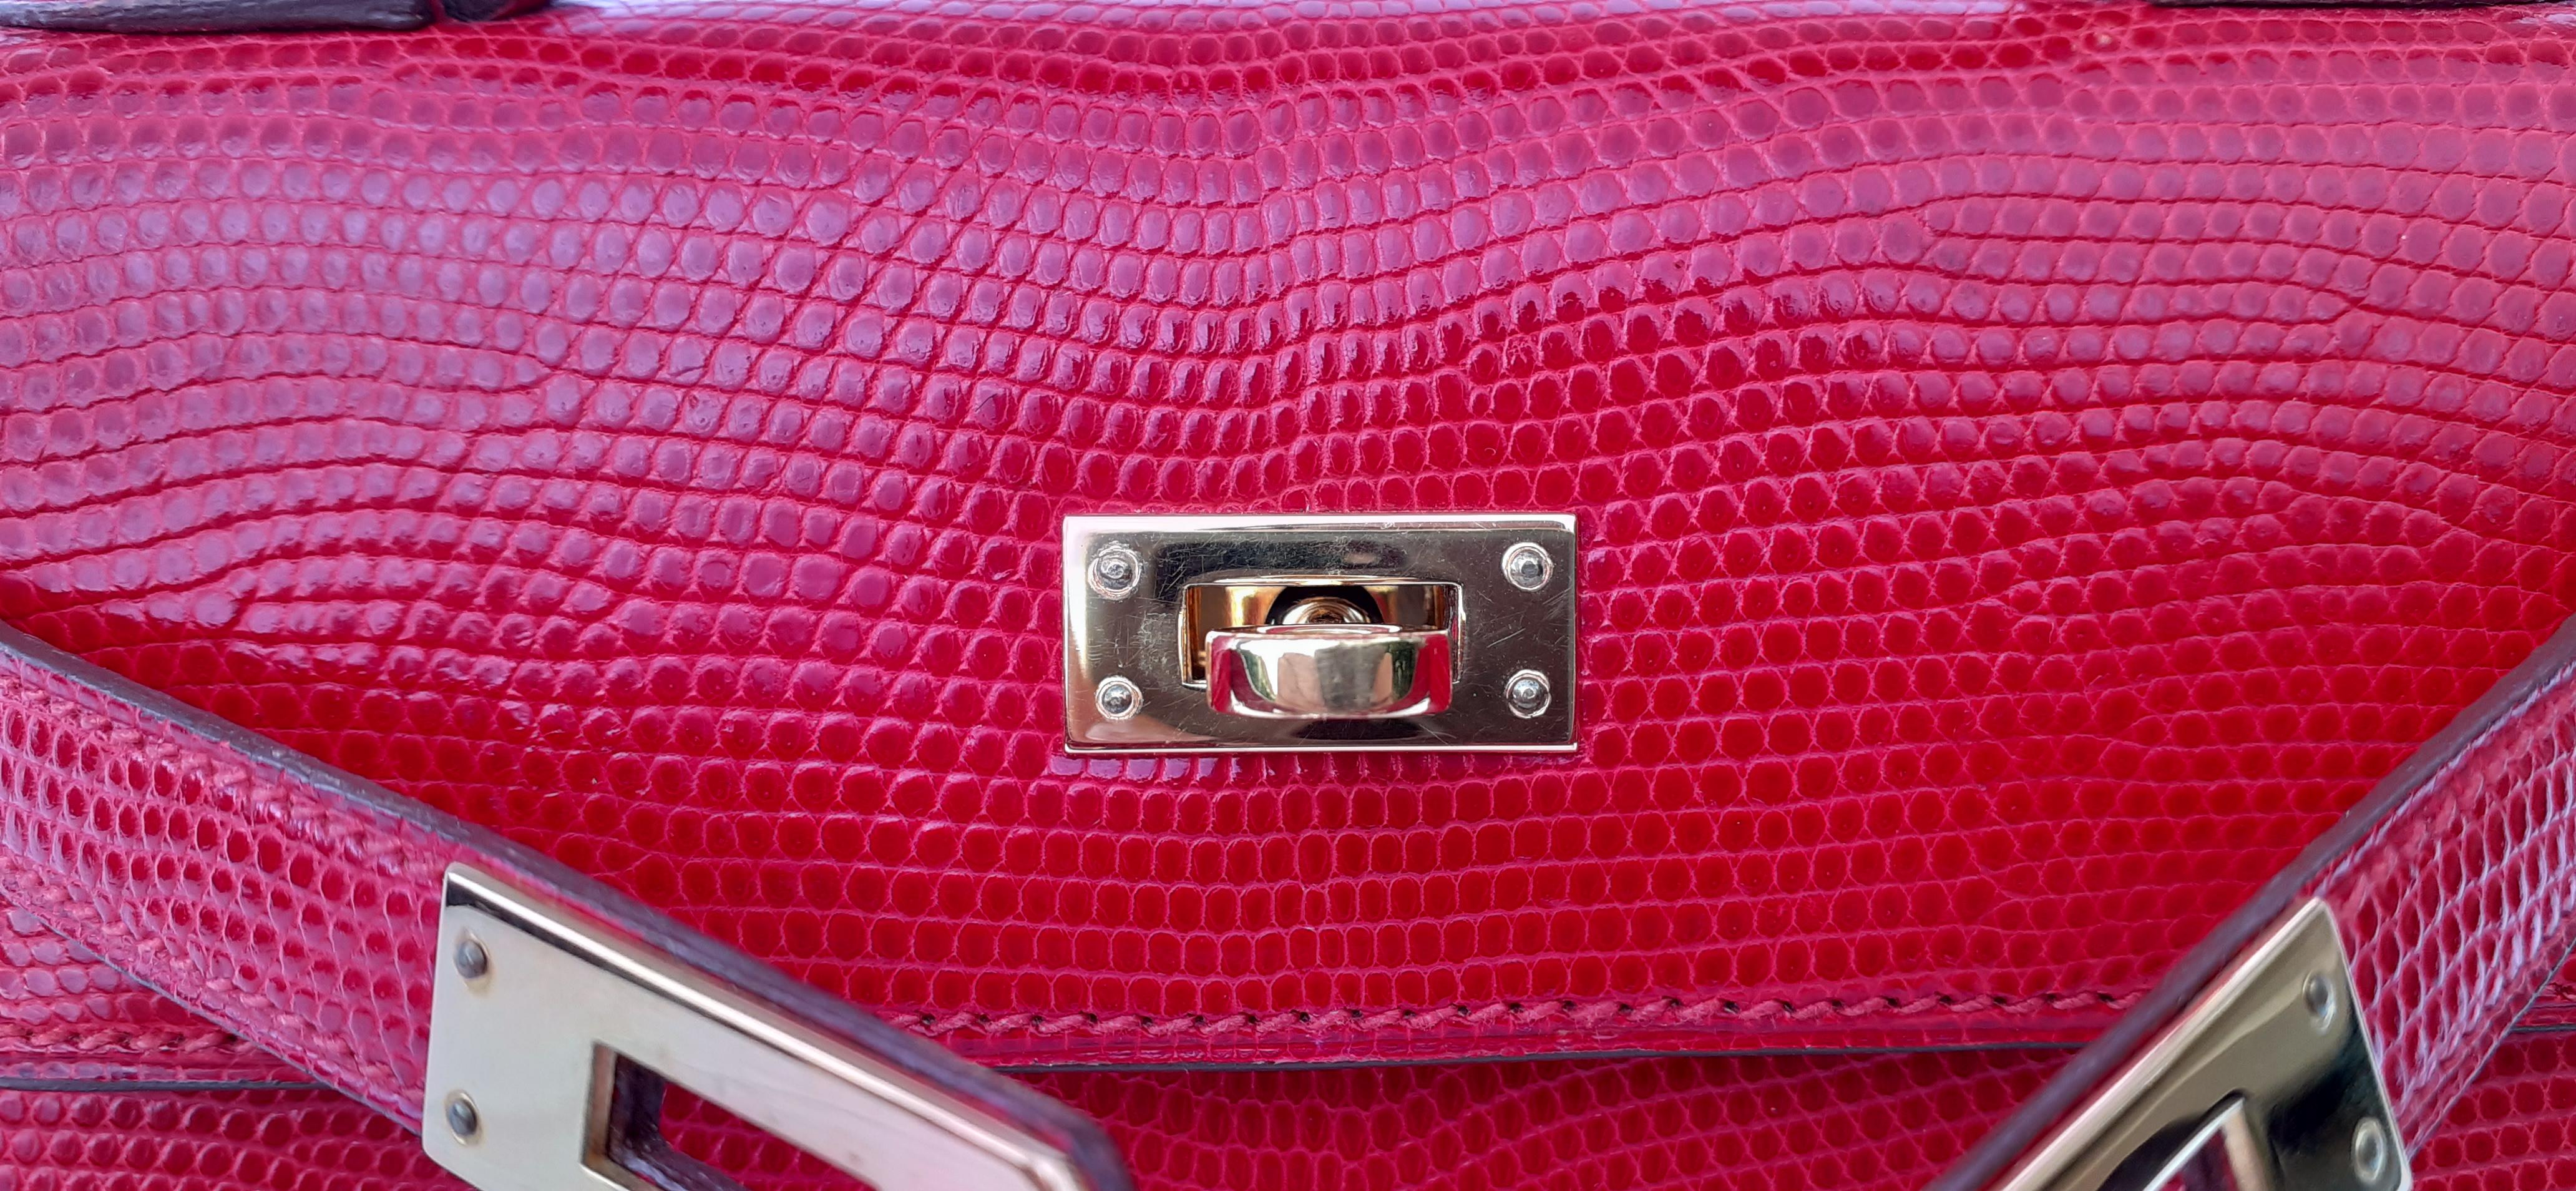 Exceptional Hermès Vintage Mini Kelly Sellier Bag Shiny Red Lizard Gold Hdw 20cm 4